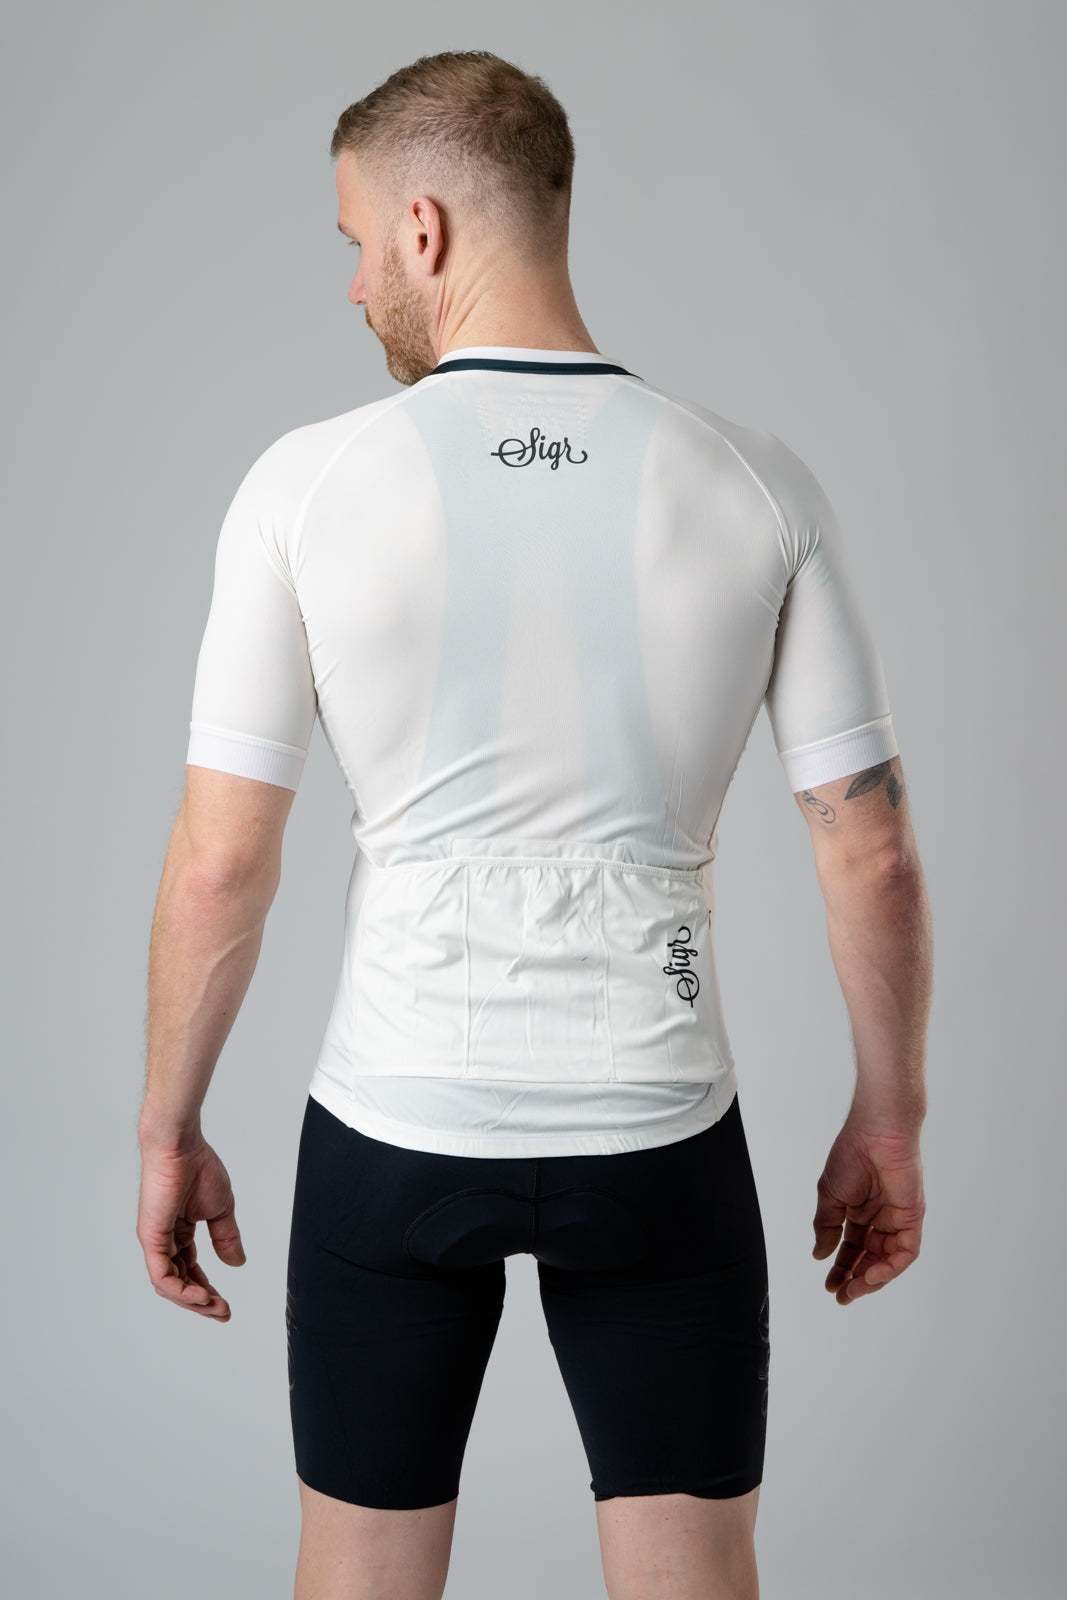 Sigr Hägg - White Cycling Jersey for men